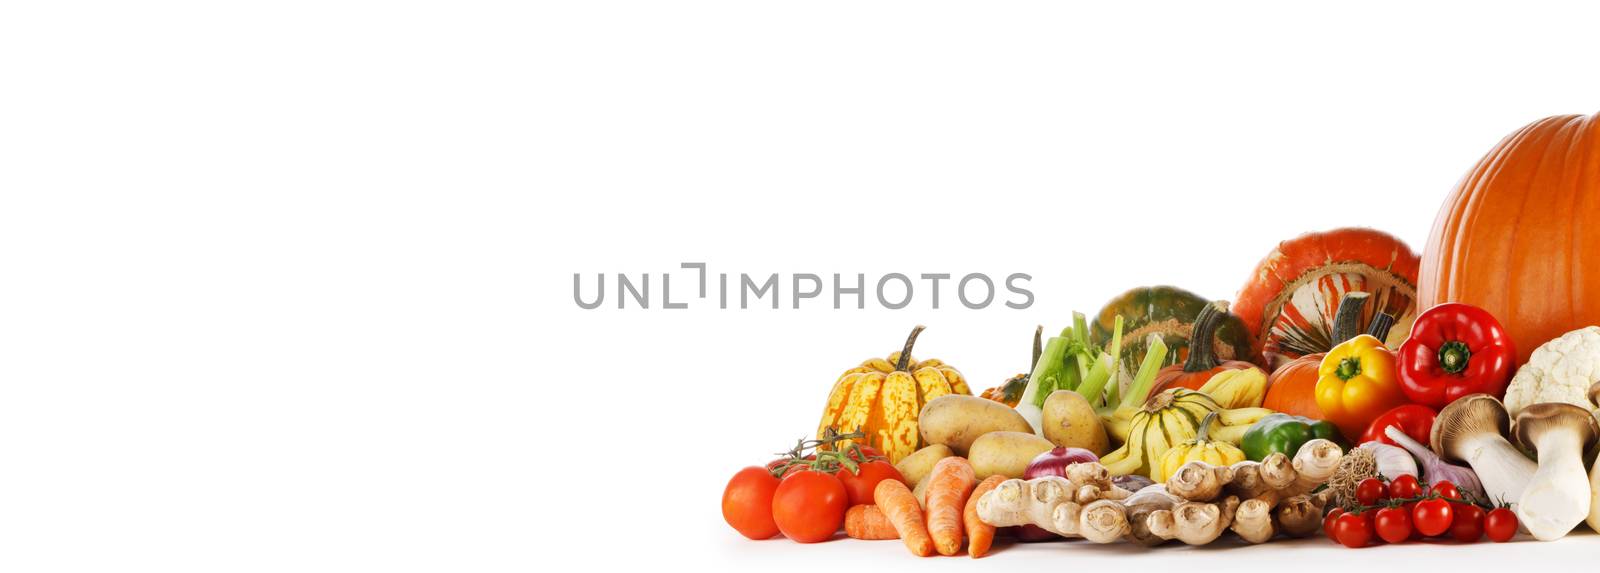 Harvest of many vegetables isolated on white background with copy space for text